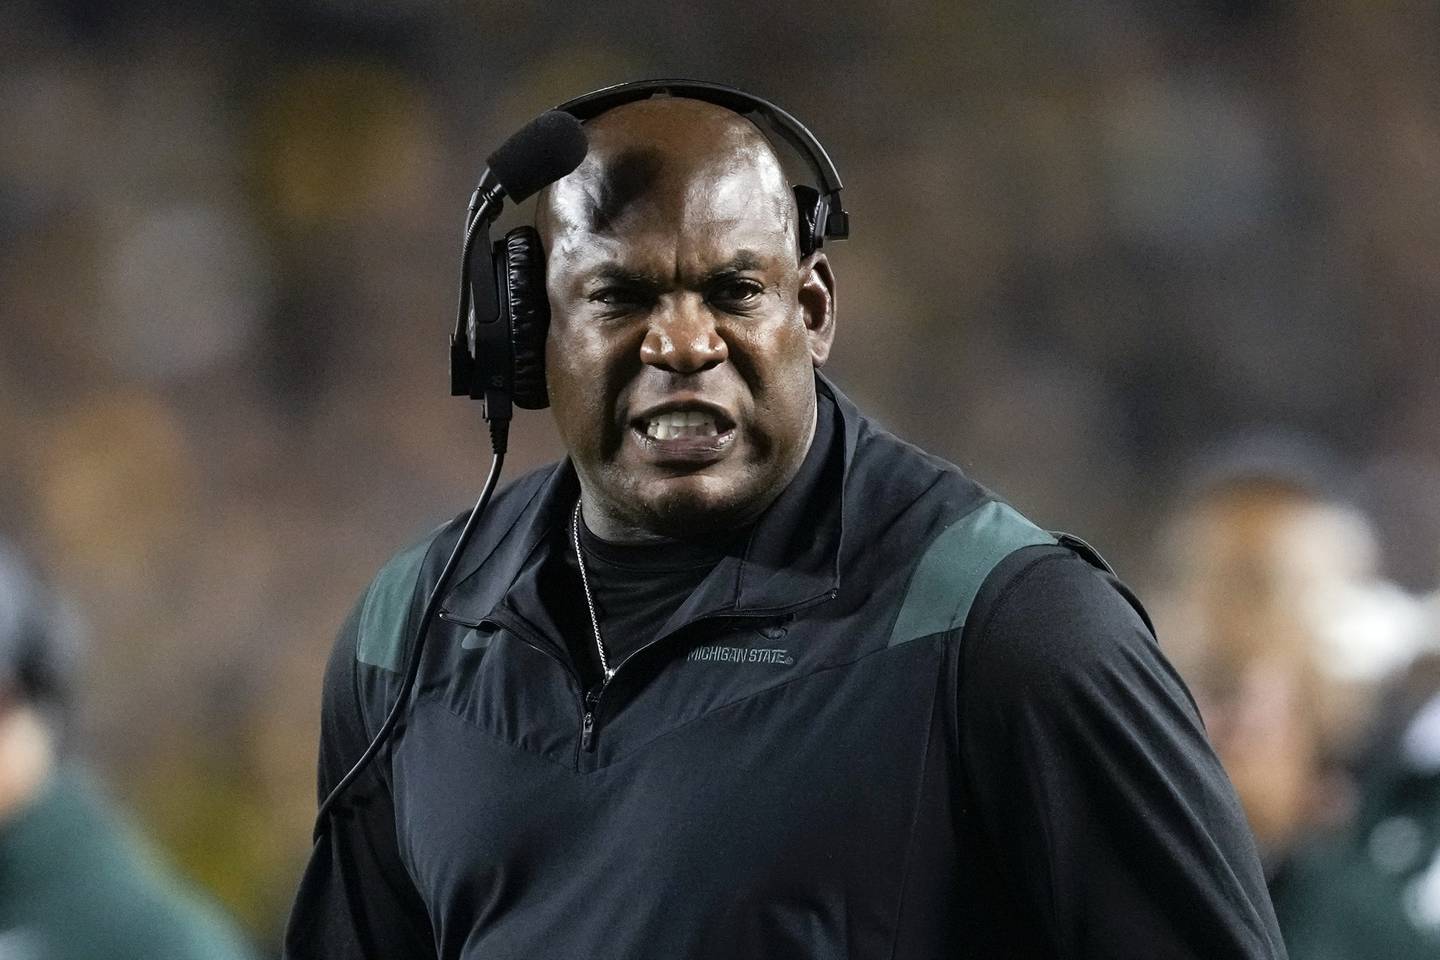 Michigan State coach Mel Tucker watches from the sideline during a game against Michigan on Saturday in Ann Arbor, Mich. The Spartans lost 29-7. 